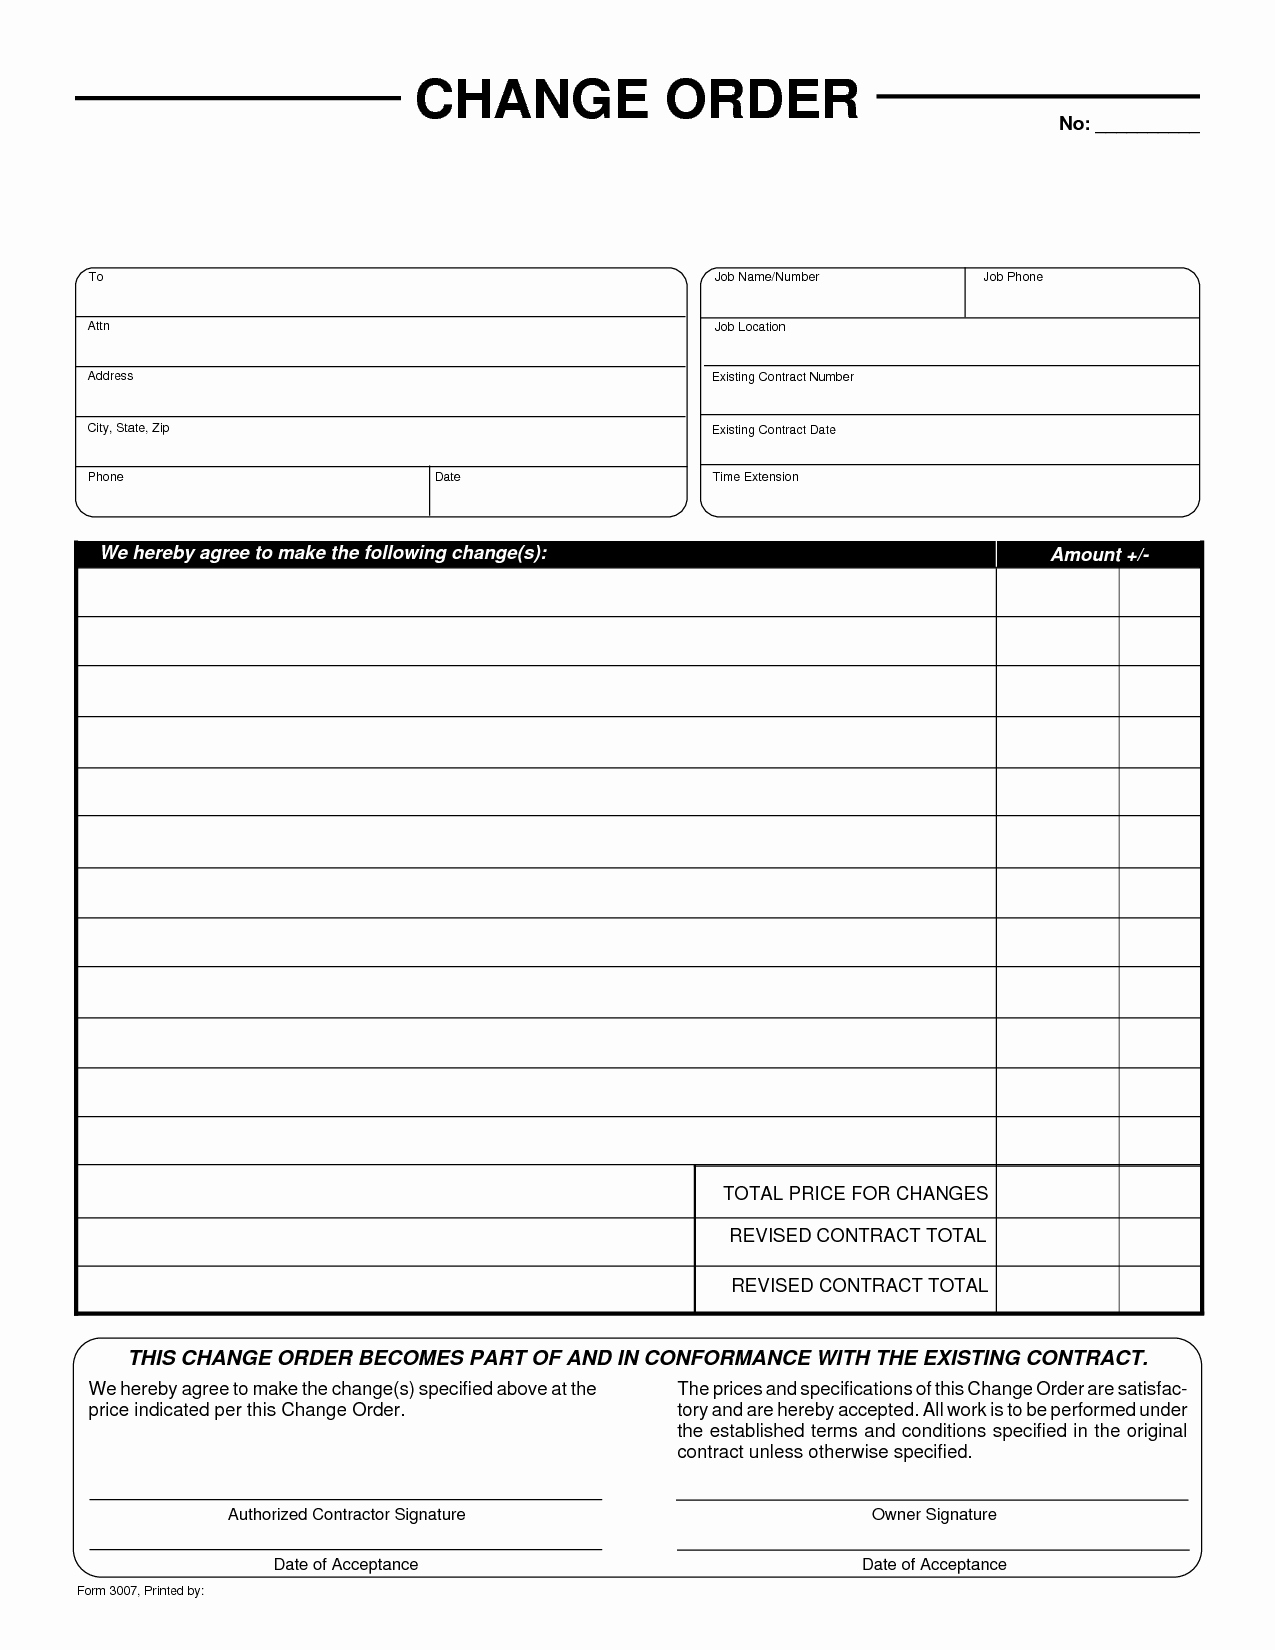 Free Change order Template Inspirational Change Of order form by Liferetreat Change order form